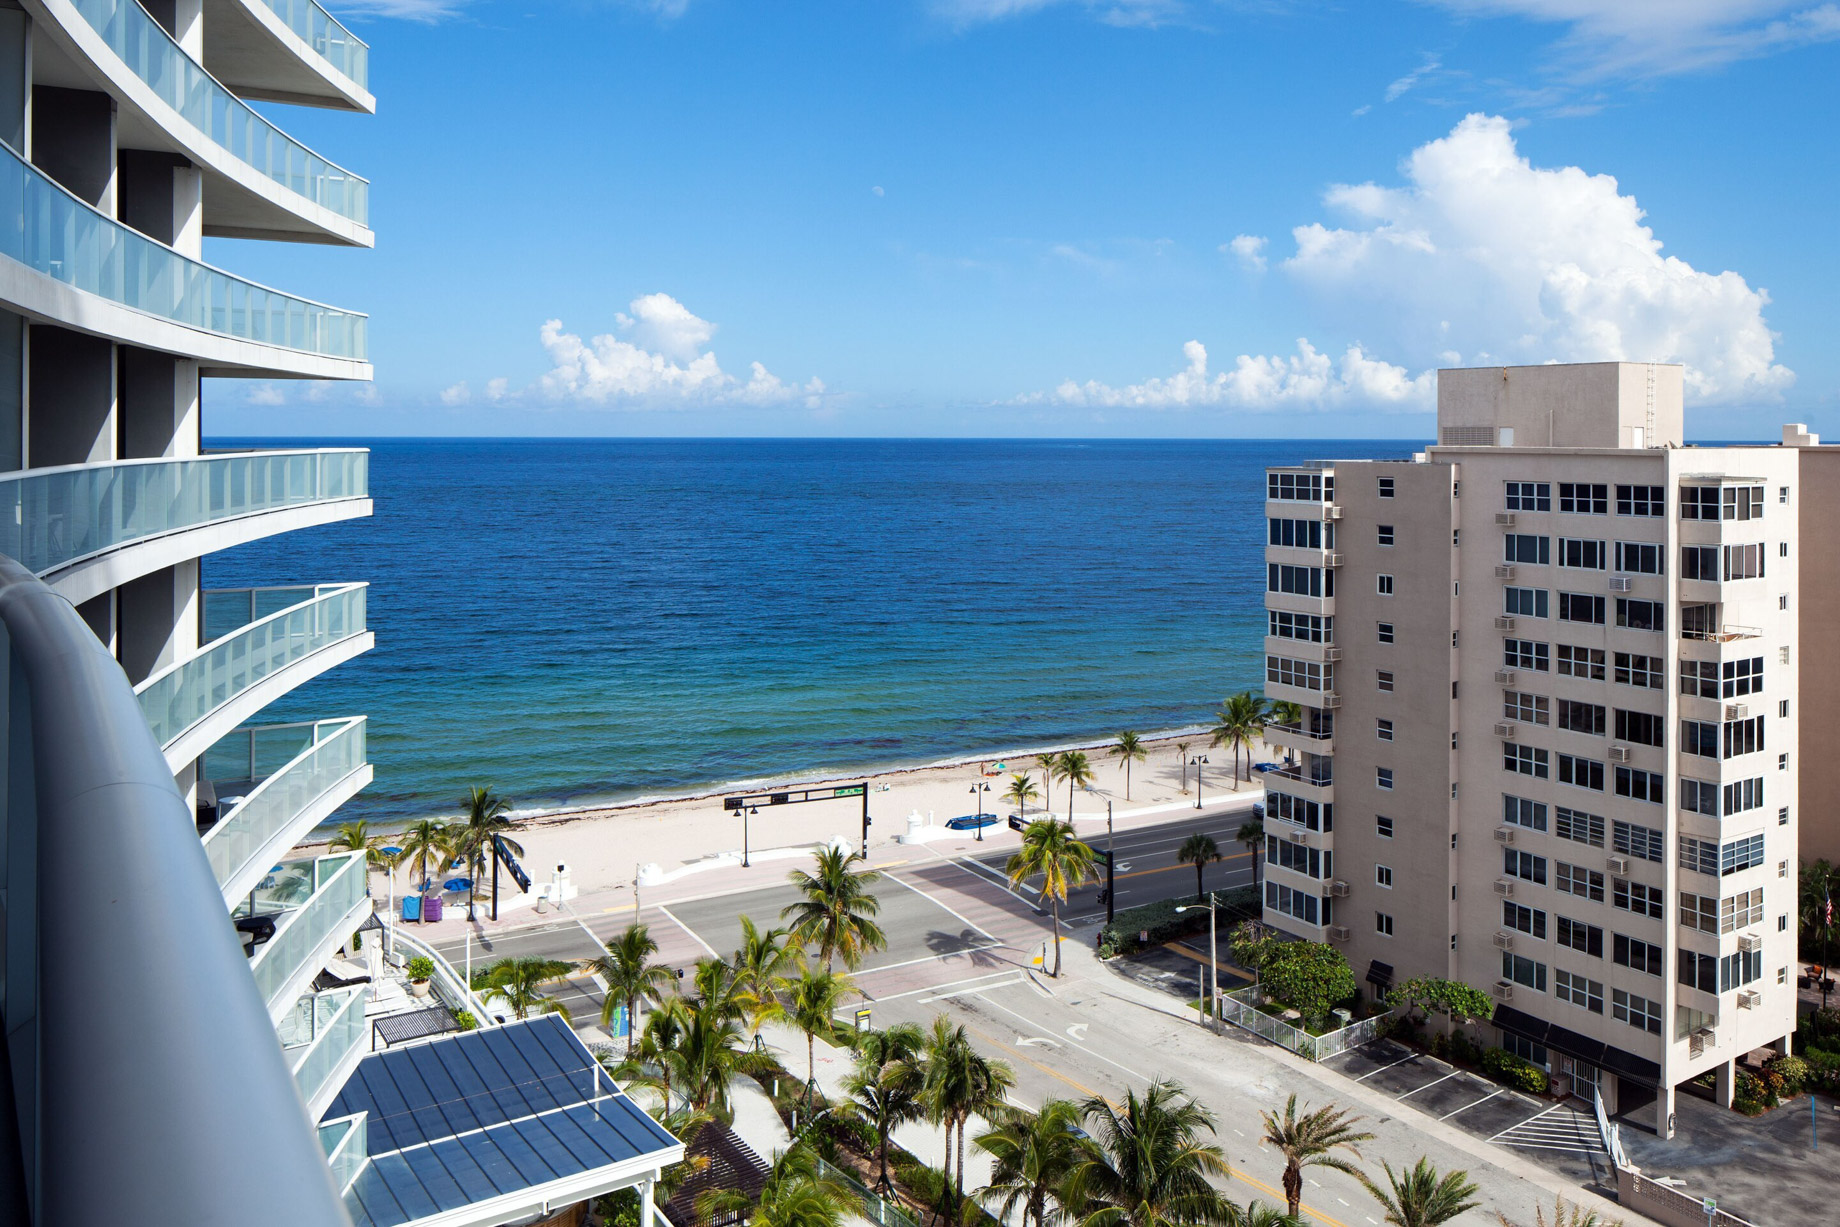 W Fort Lauderdale Hotel - Fort Lauderdale, FL, USA - Guest Room Partial Ocean View